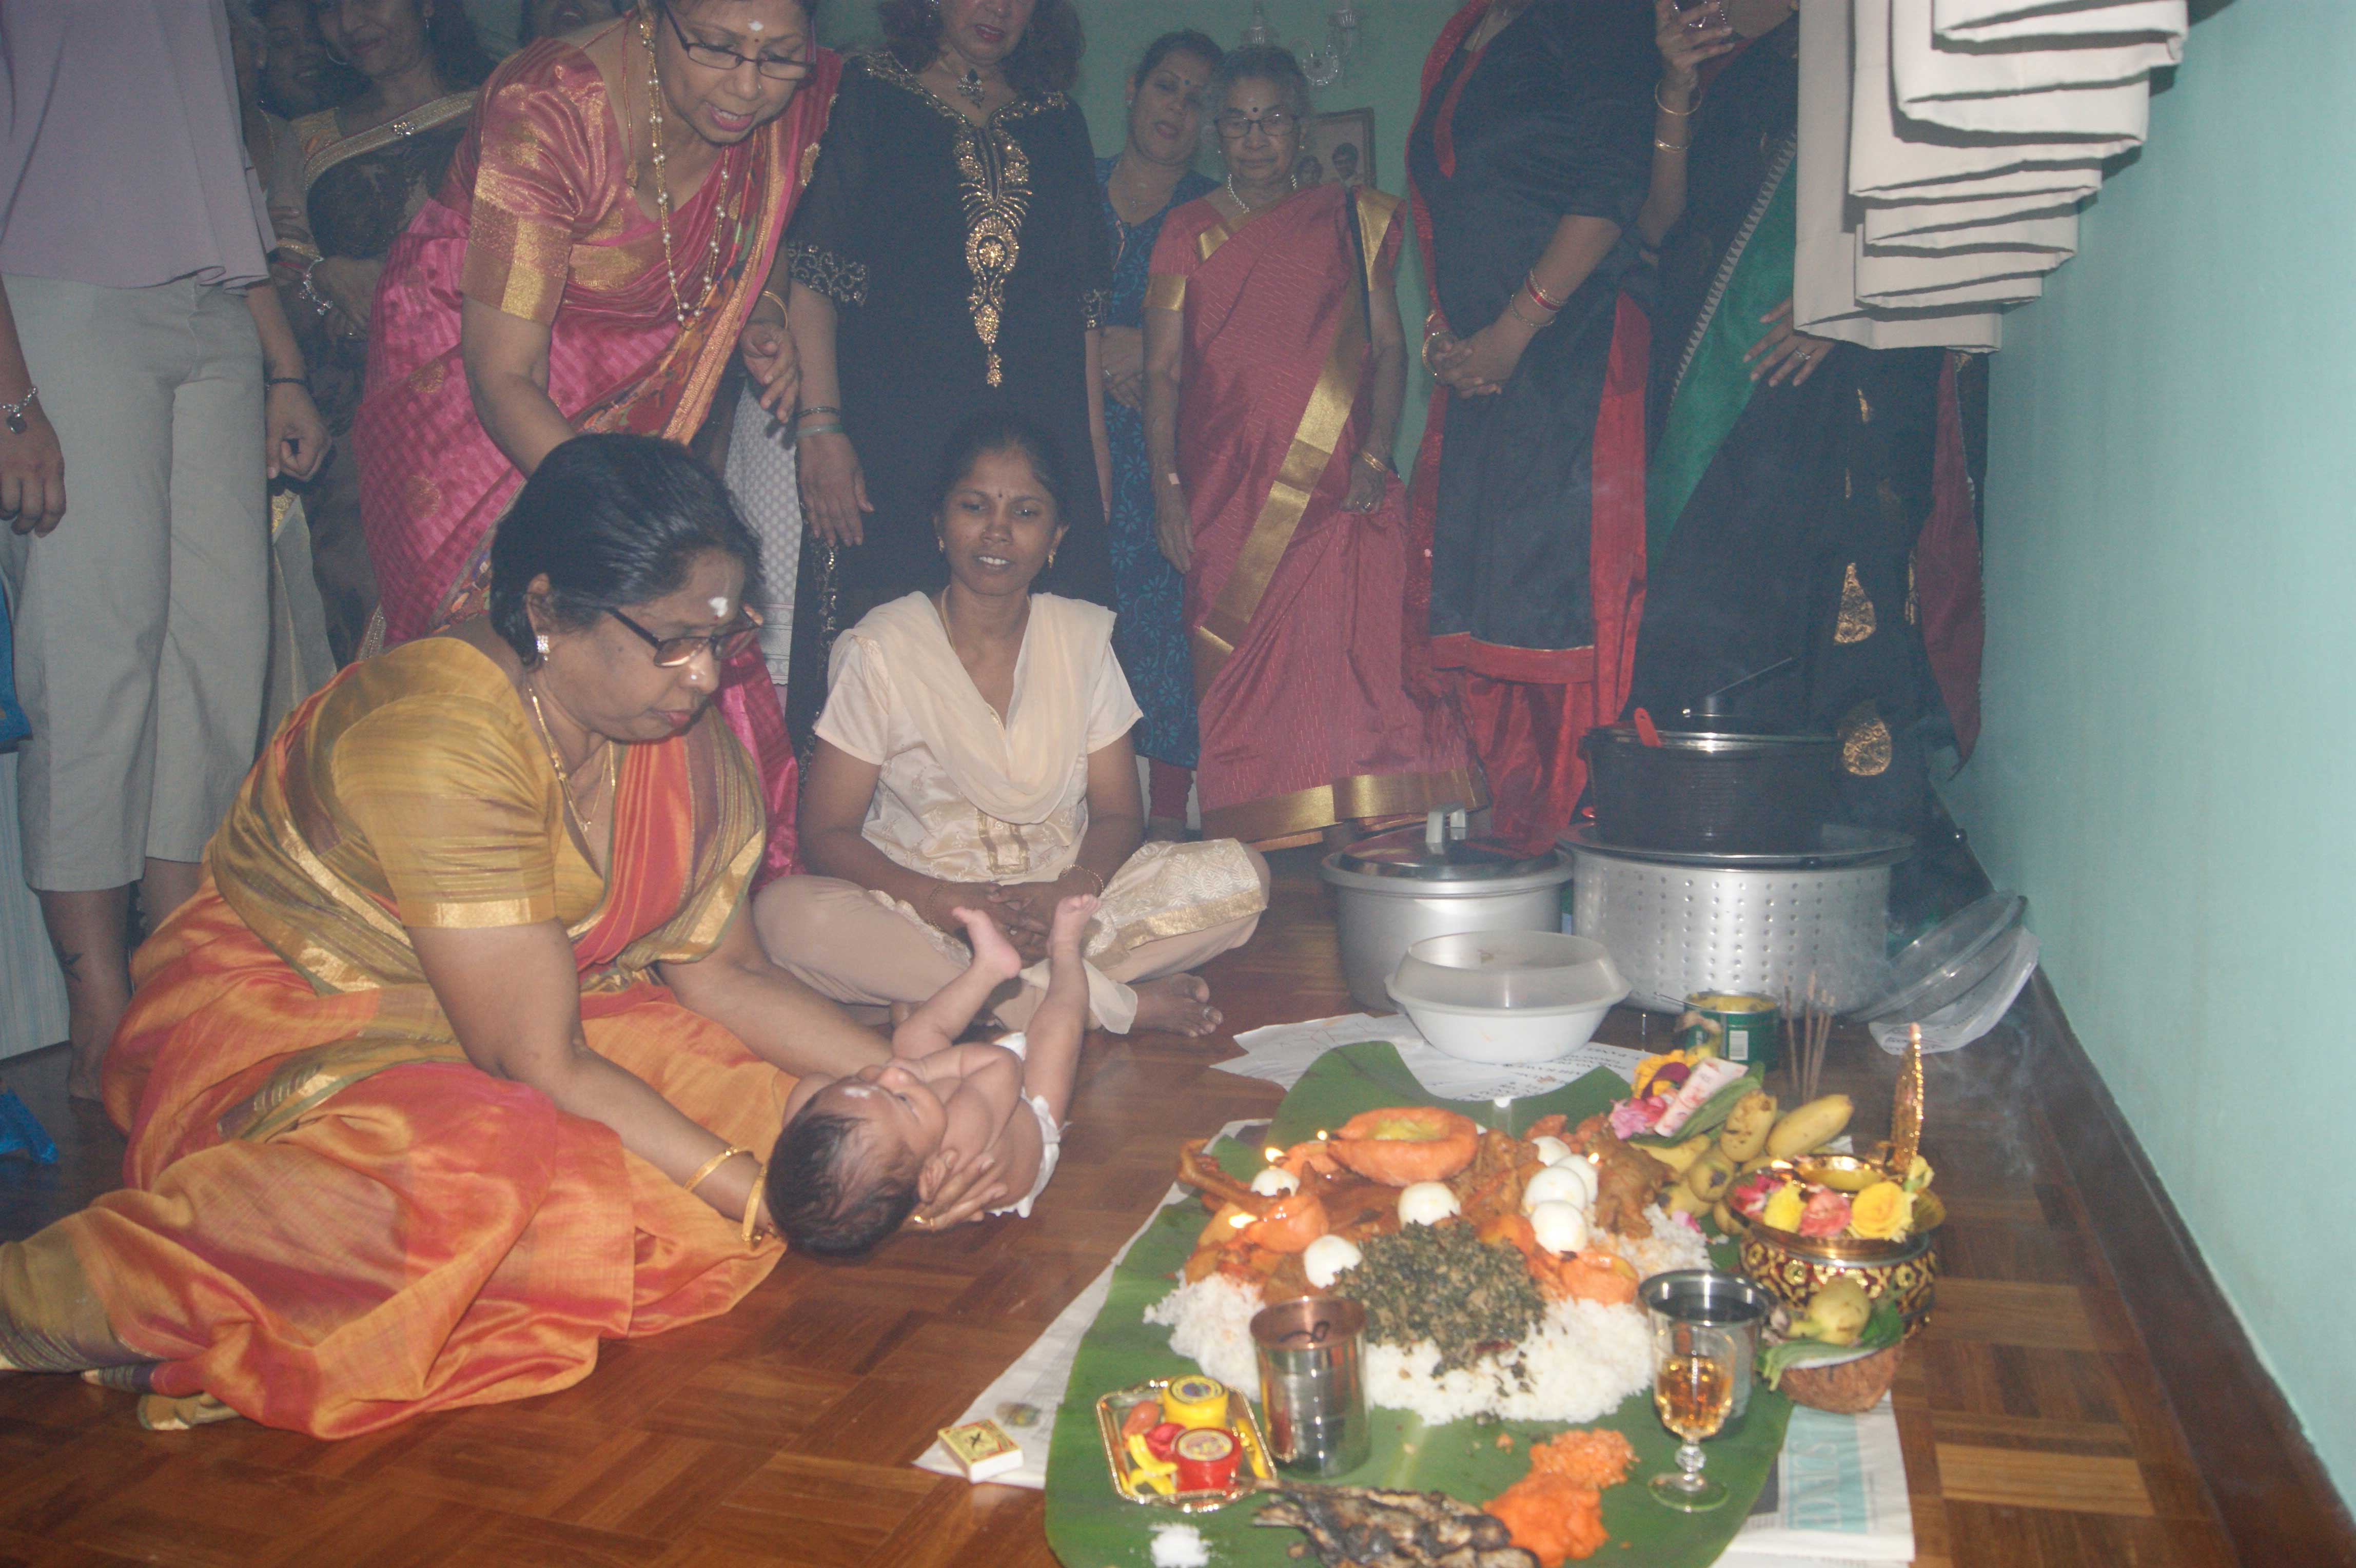 Madam Rajeshwari Govindasamy holding the baby in front of the <i>padayal</i> or food offering for Sri Periyachi Amman, a deity believed to be the protector of infants. This prayer ceremony is attended by only women and is held when the child is either 16 days or 30 days old.  